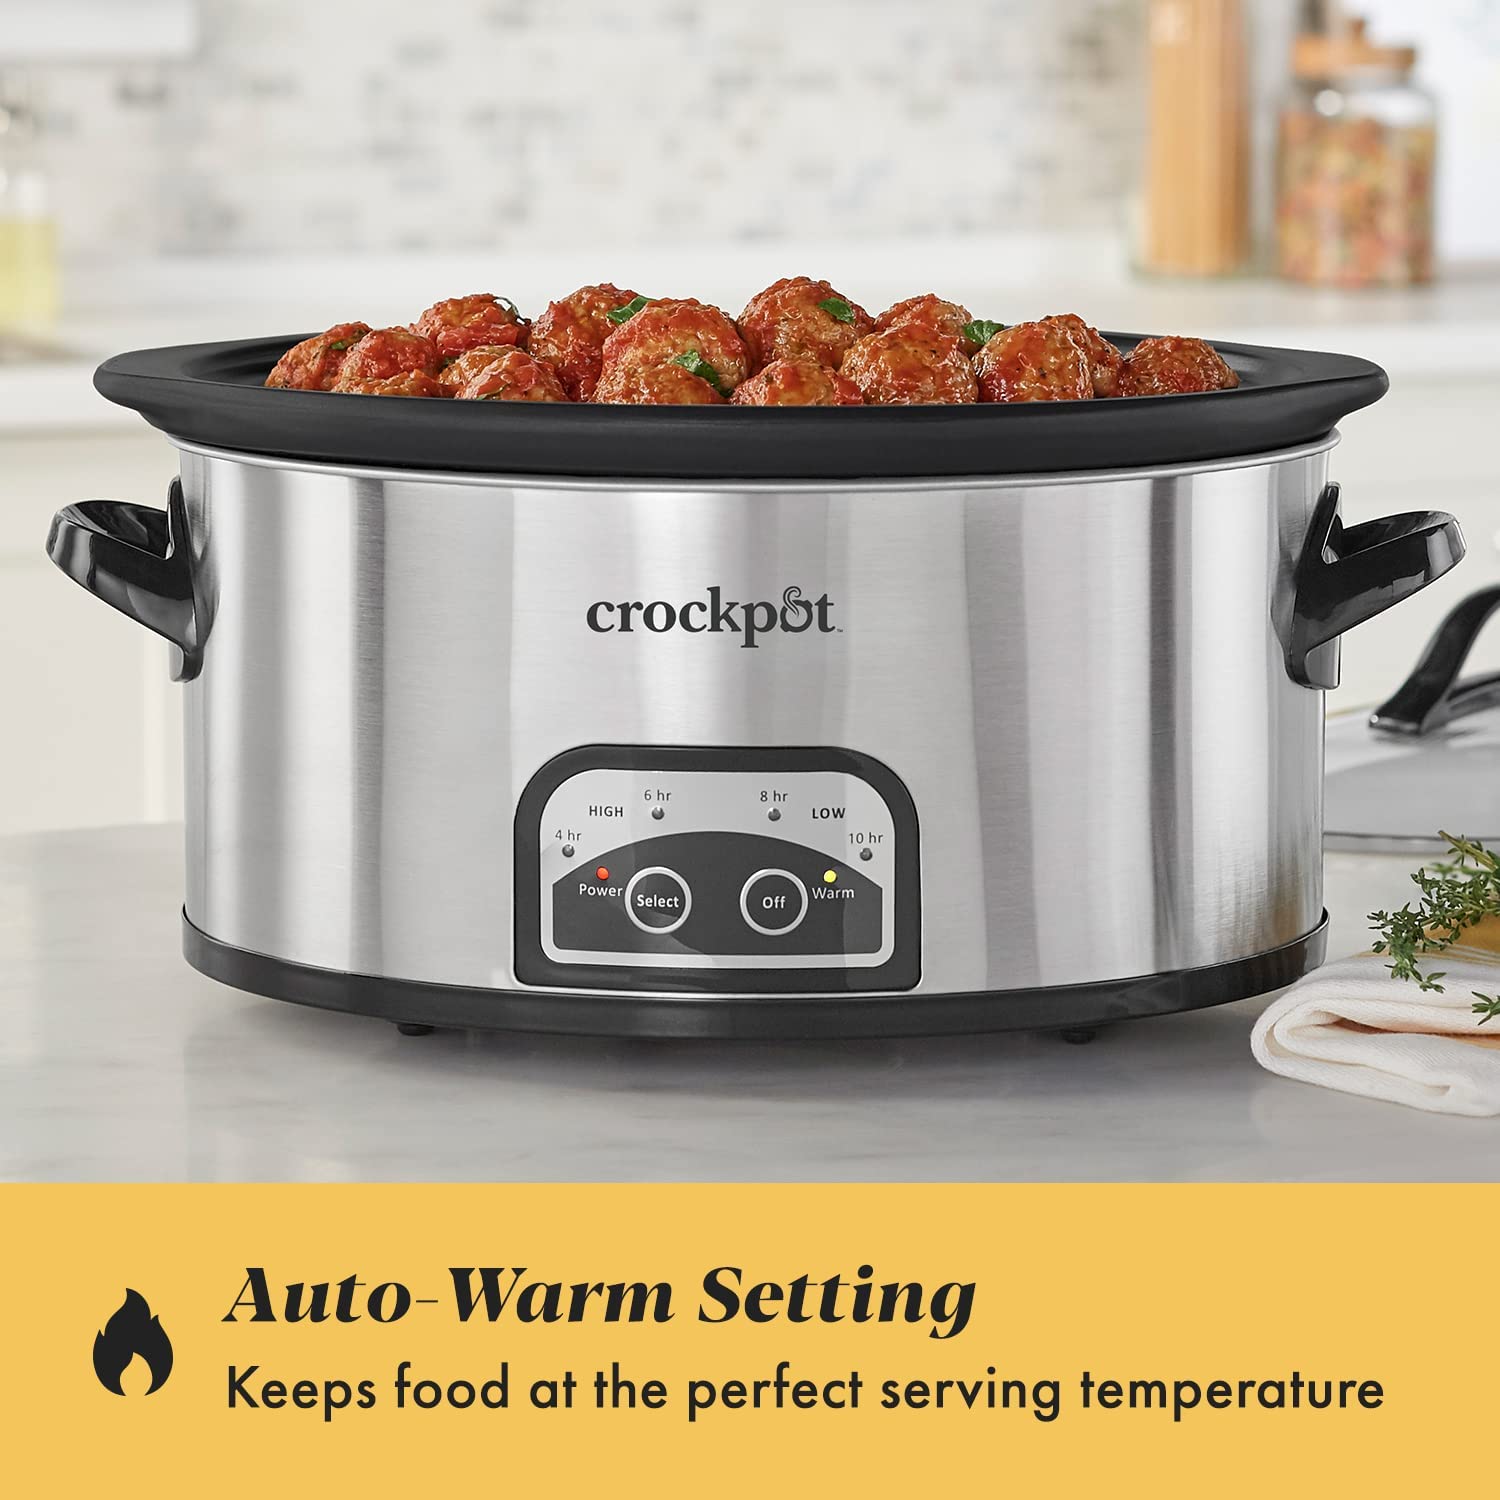 https://bigbigmart.com/wp-content/uploads/2023/03/Crock-Pot-6-Quart-Slow-Cooker-with-Auto-Warm-Setting-and-Programmable-Controls-Stainless-Steel2.jpg